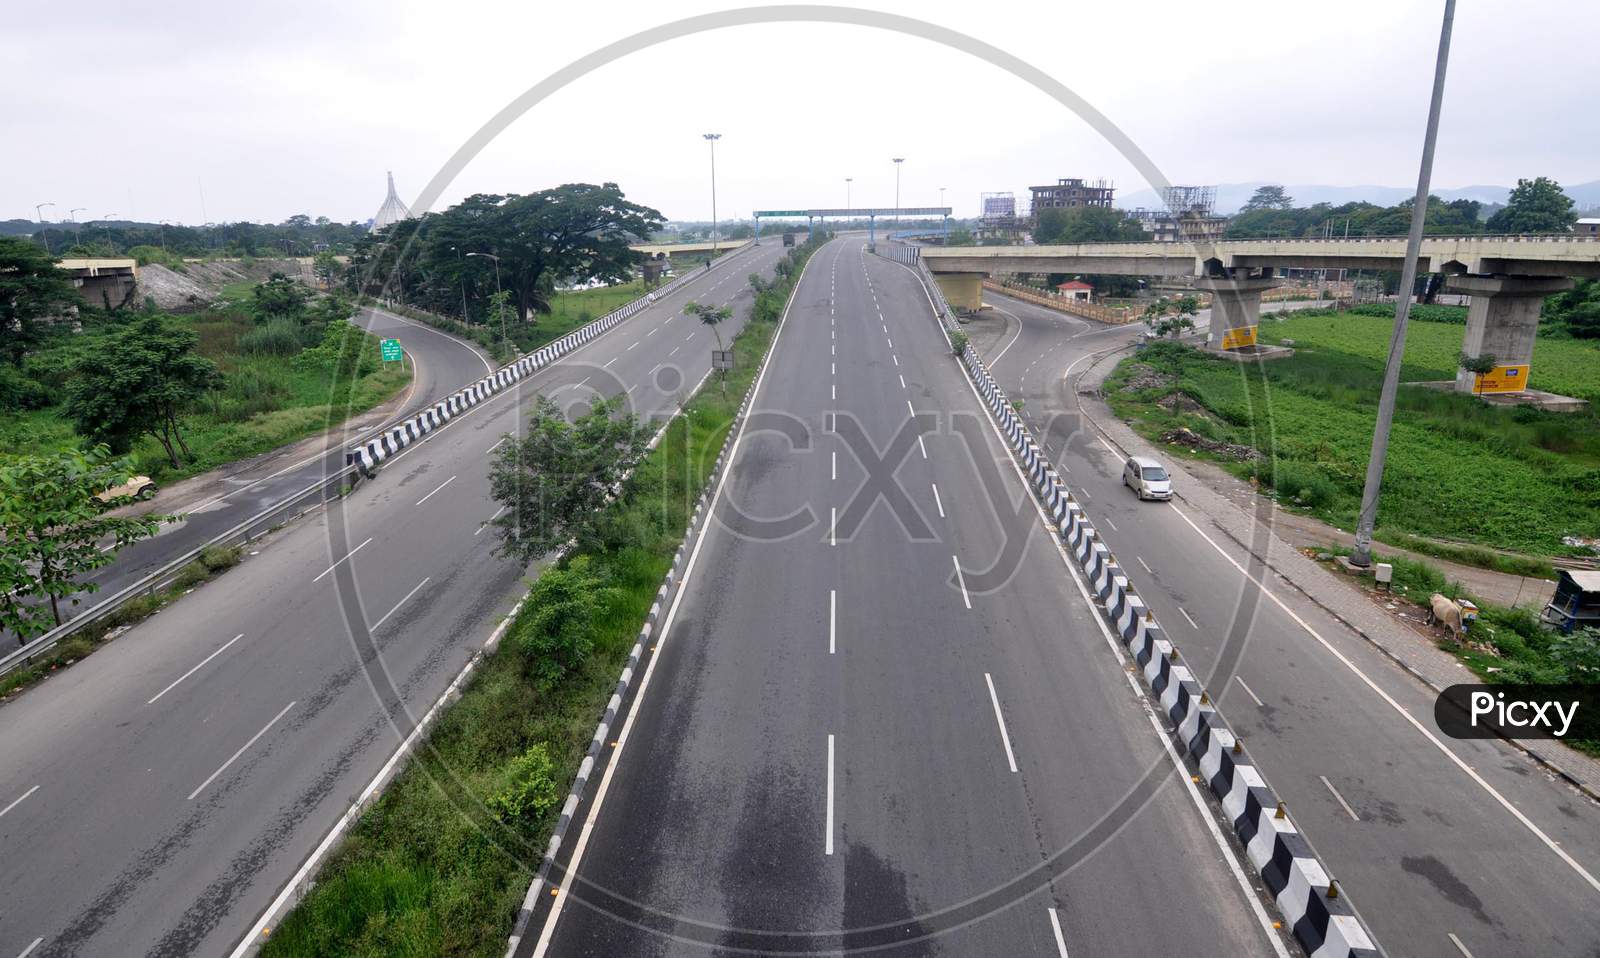 A Deserted Road is pictured Following The Assam Government's Decision To Impose Total Lockdown To Curb The Spread Of Novel Coronavirus, In Guwahati on June 29, 2020.